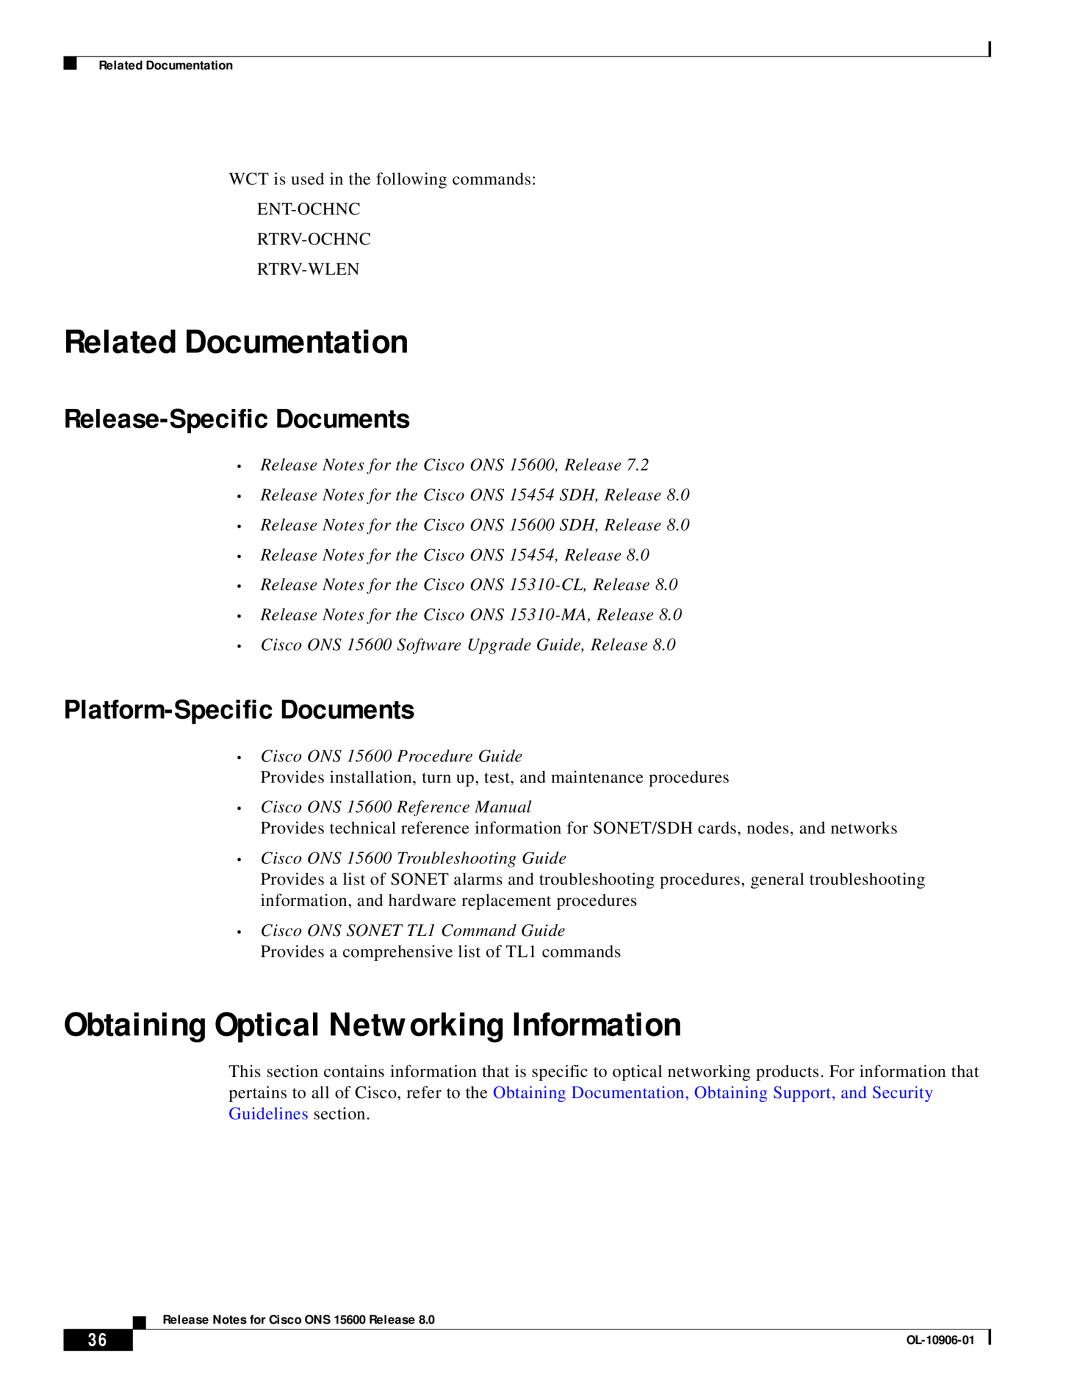 Cisco Systems ONS 15600 manual Related Documentation, Obtaining Optical Networking Information, Release-Specific Documents 